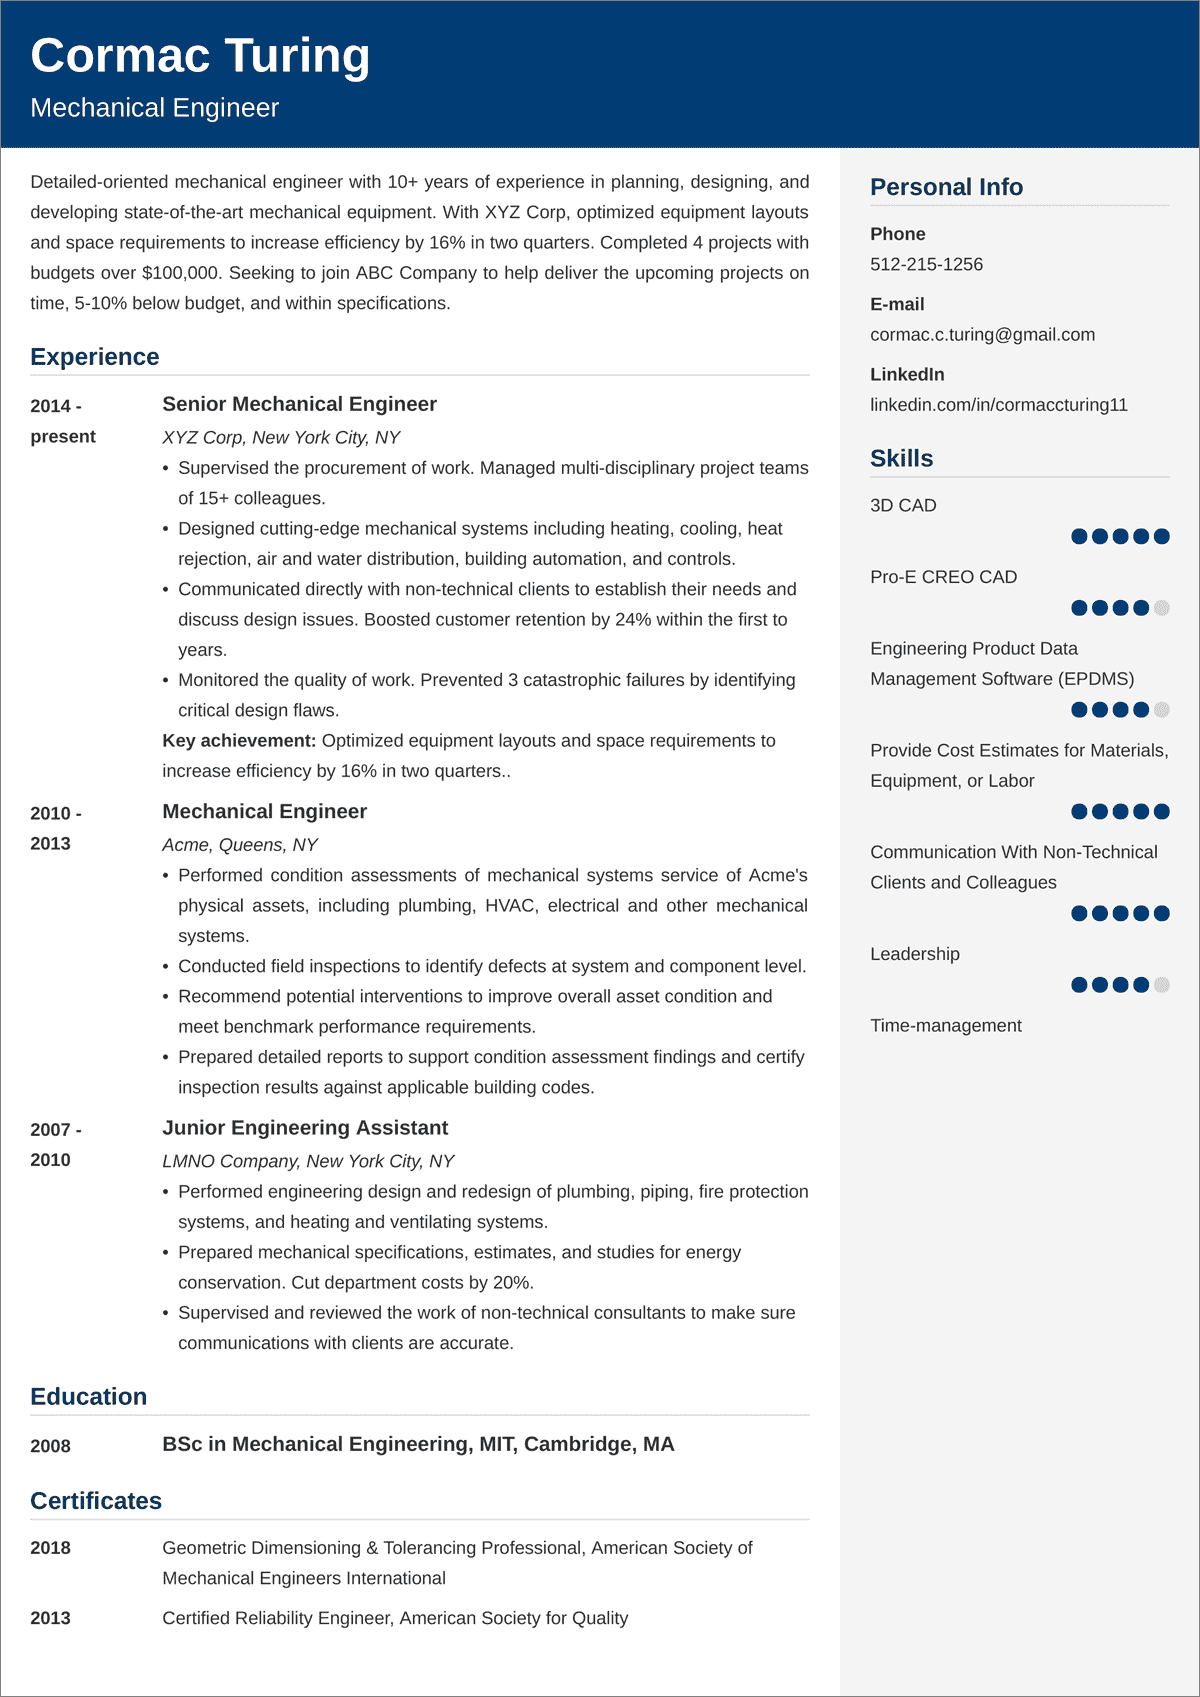 Engineering Resume Templates / Software Engineer Resume Example | CV Sample [2020 ... : • include five to eight bullet points for each position.